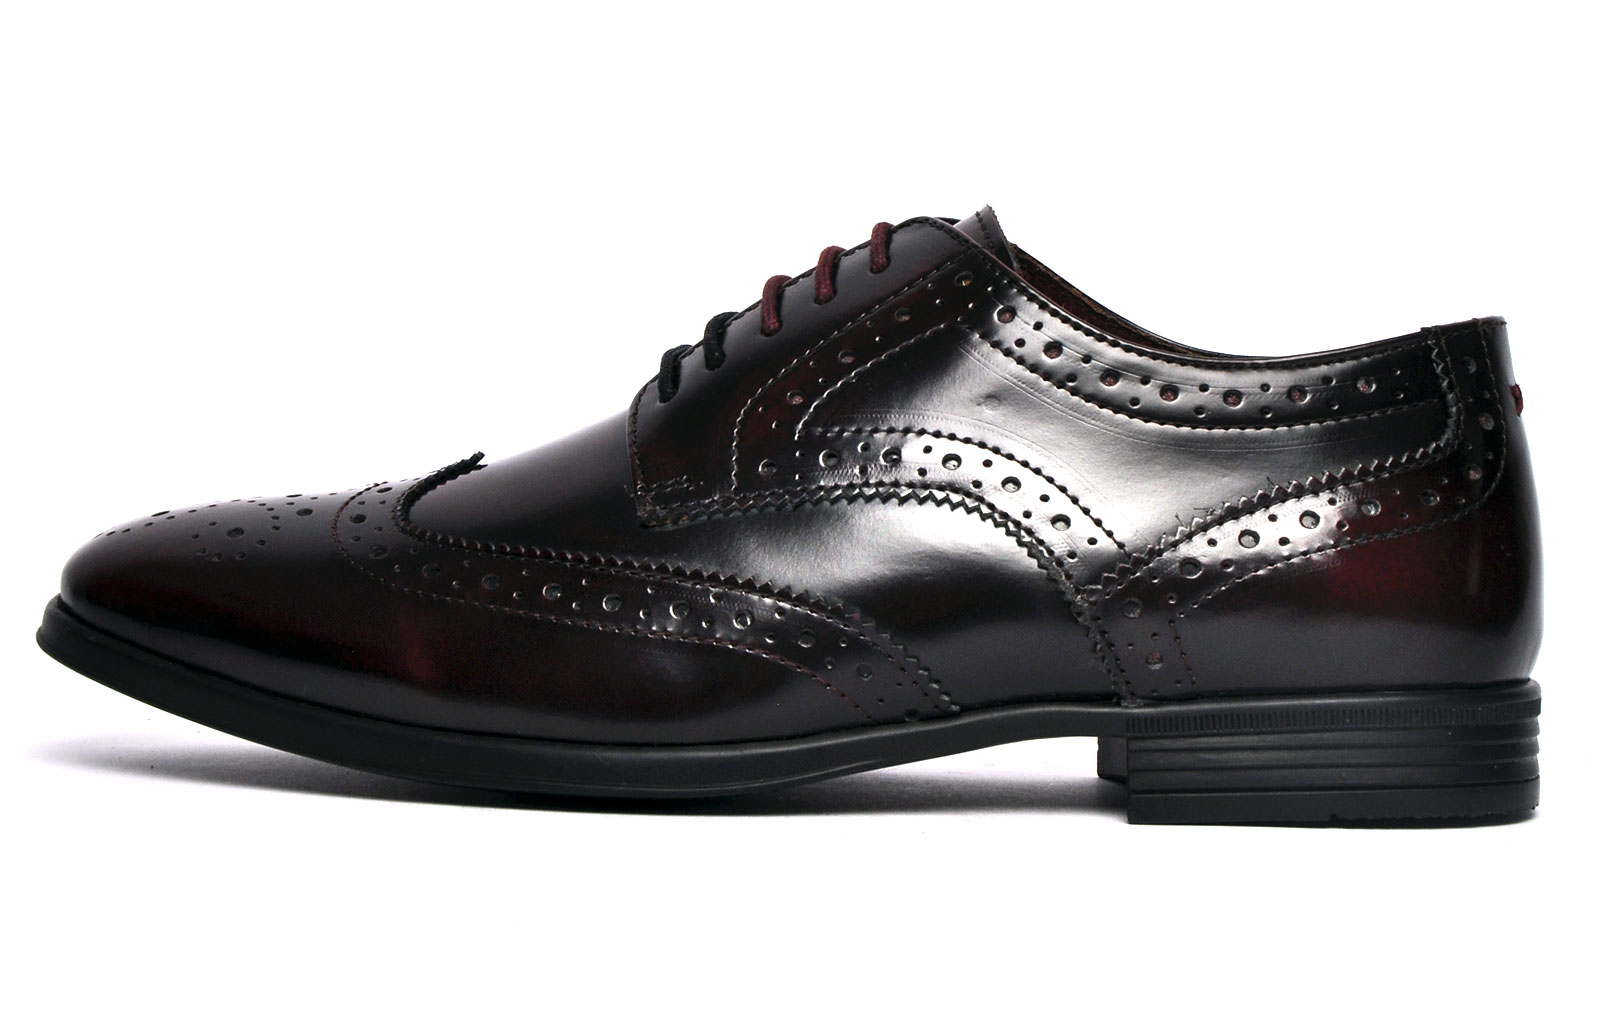 Catesby England Wentworth Brogue Leather - PAT-335900